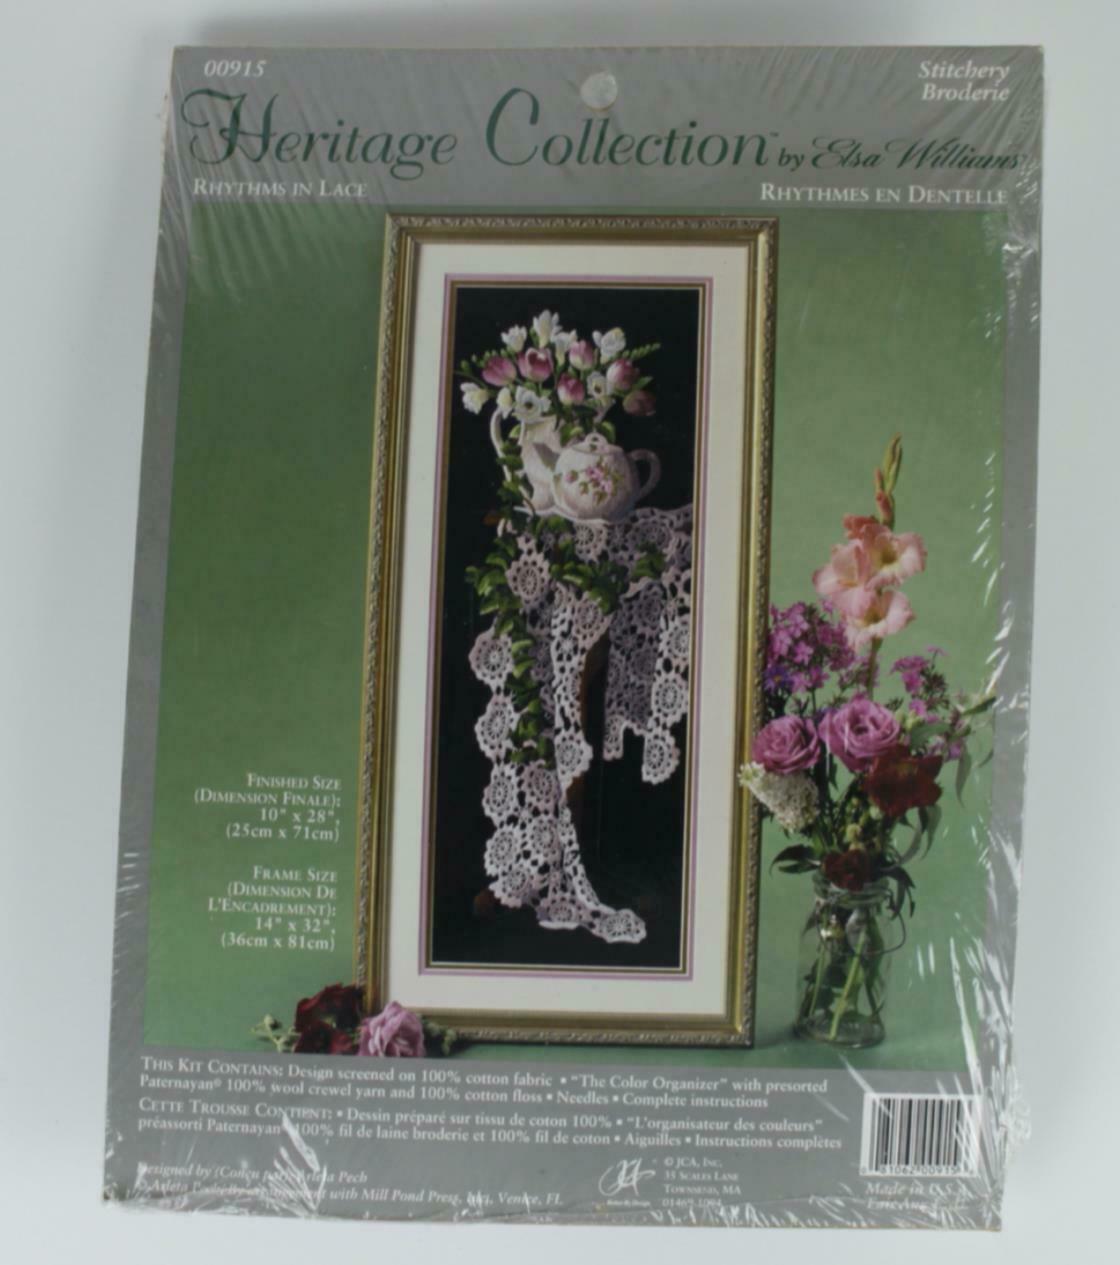 Vintage Elsa Williams Heritage Collection Crewel Embroidery Kit Rhythms In Lace